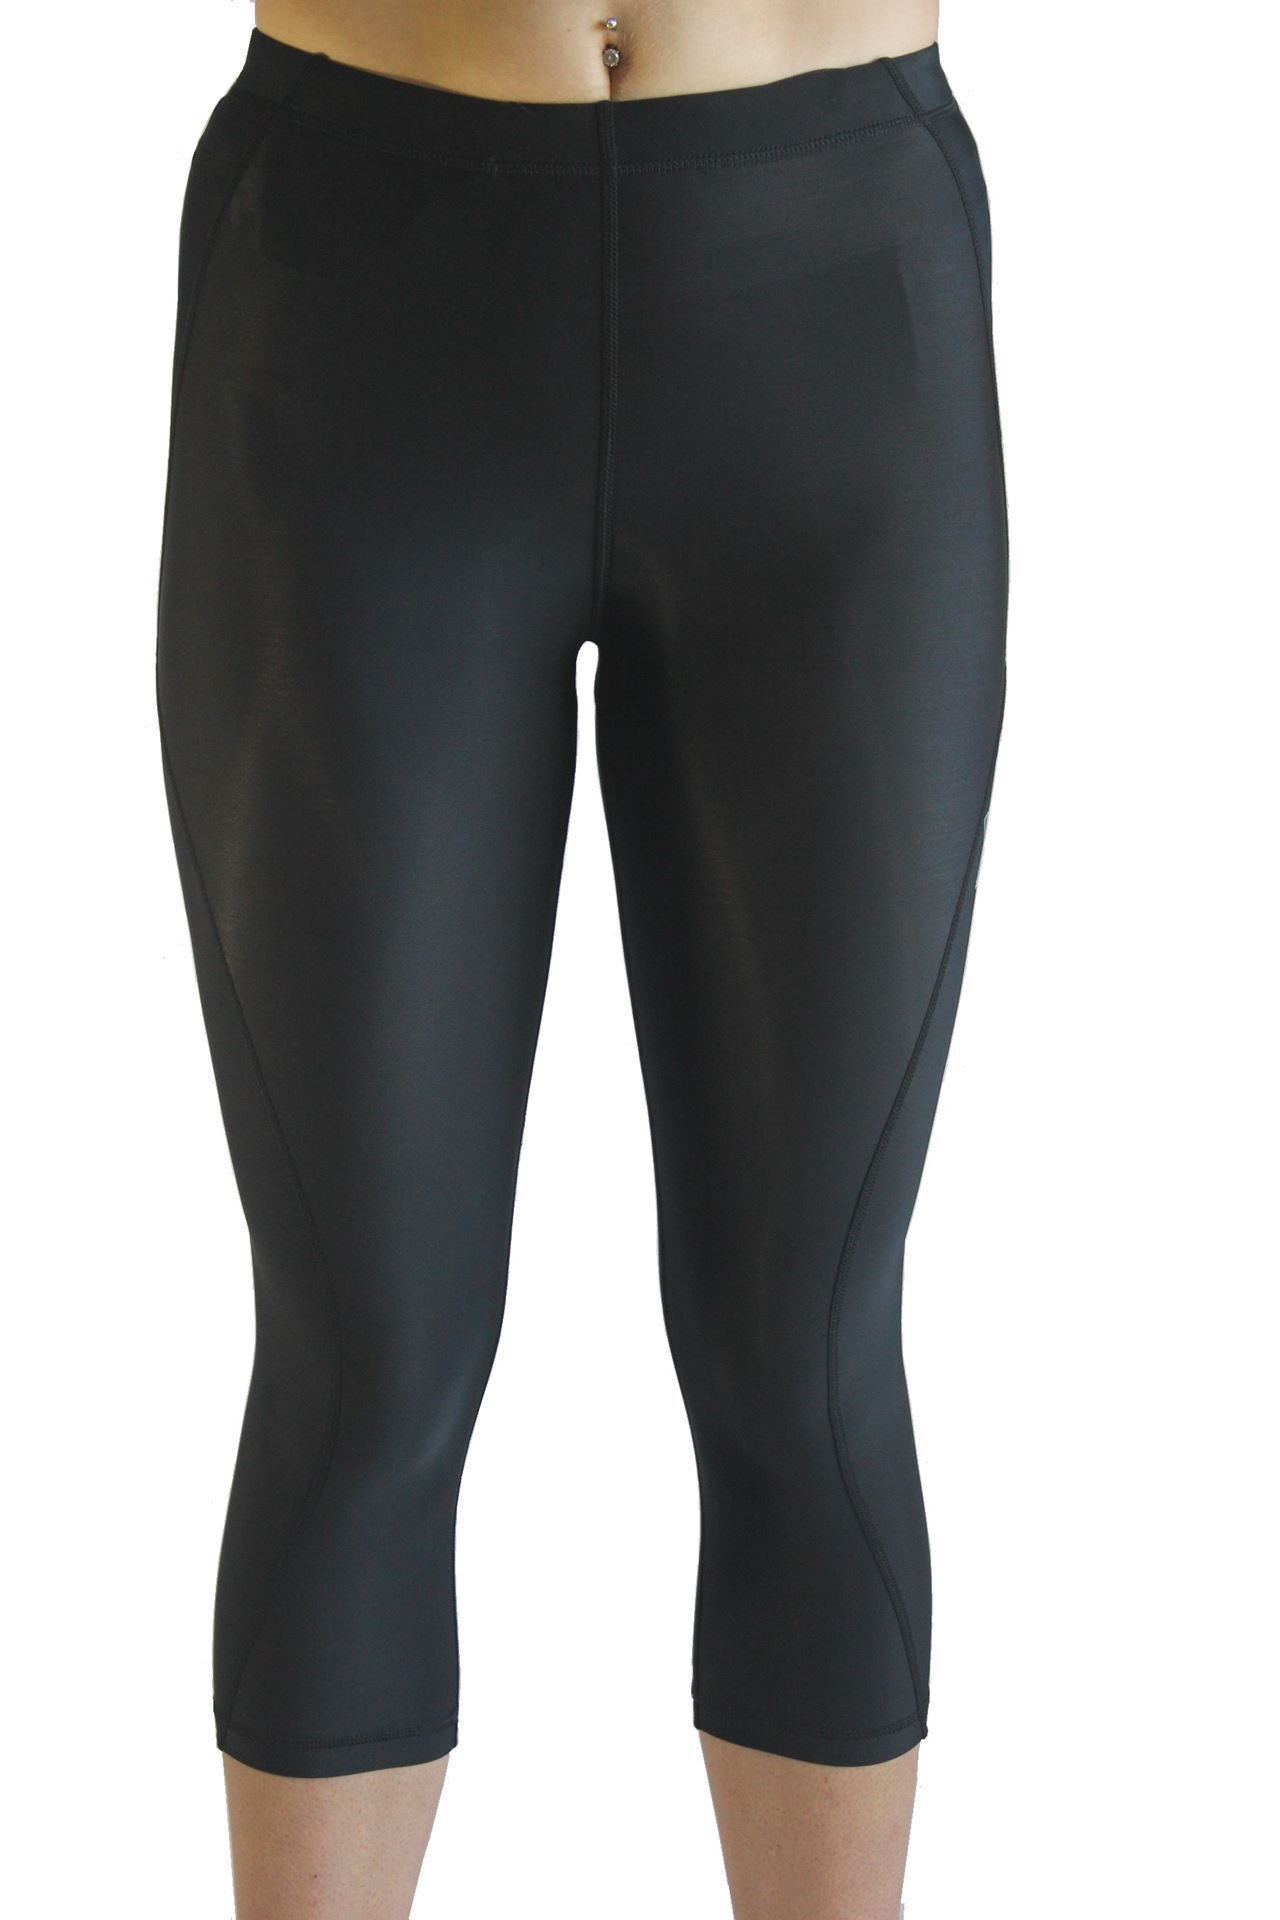 Compression 3/4 Pants Womens-Kinesio Tape, Ankle Guards, Injury